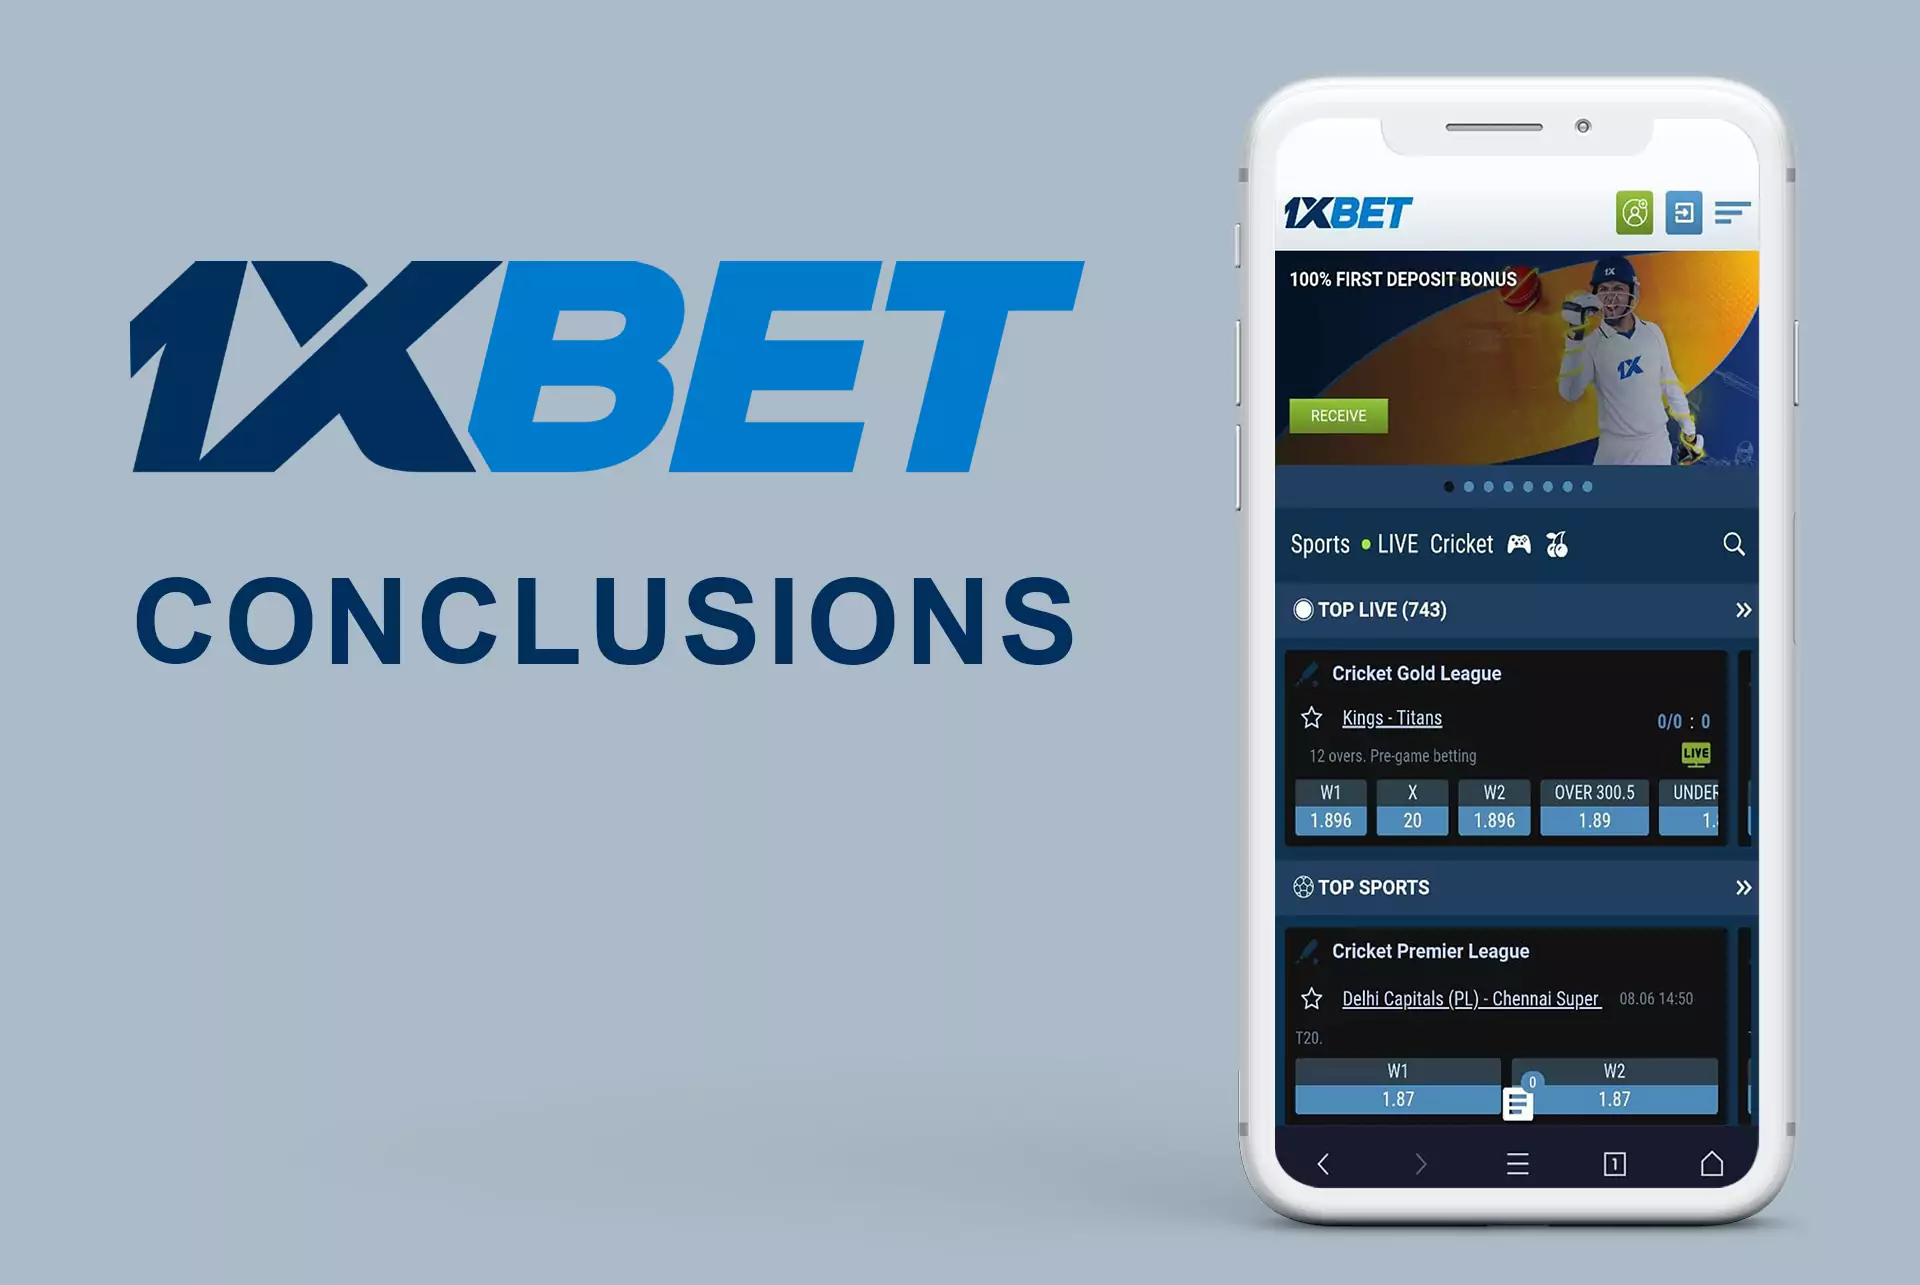 1xbet158657 top: Is Not That Difficult As You Think